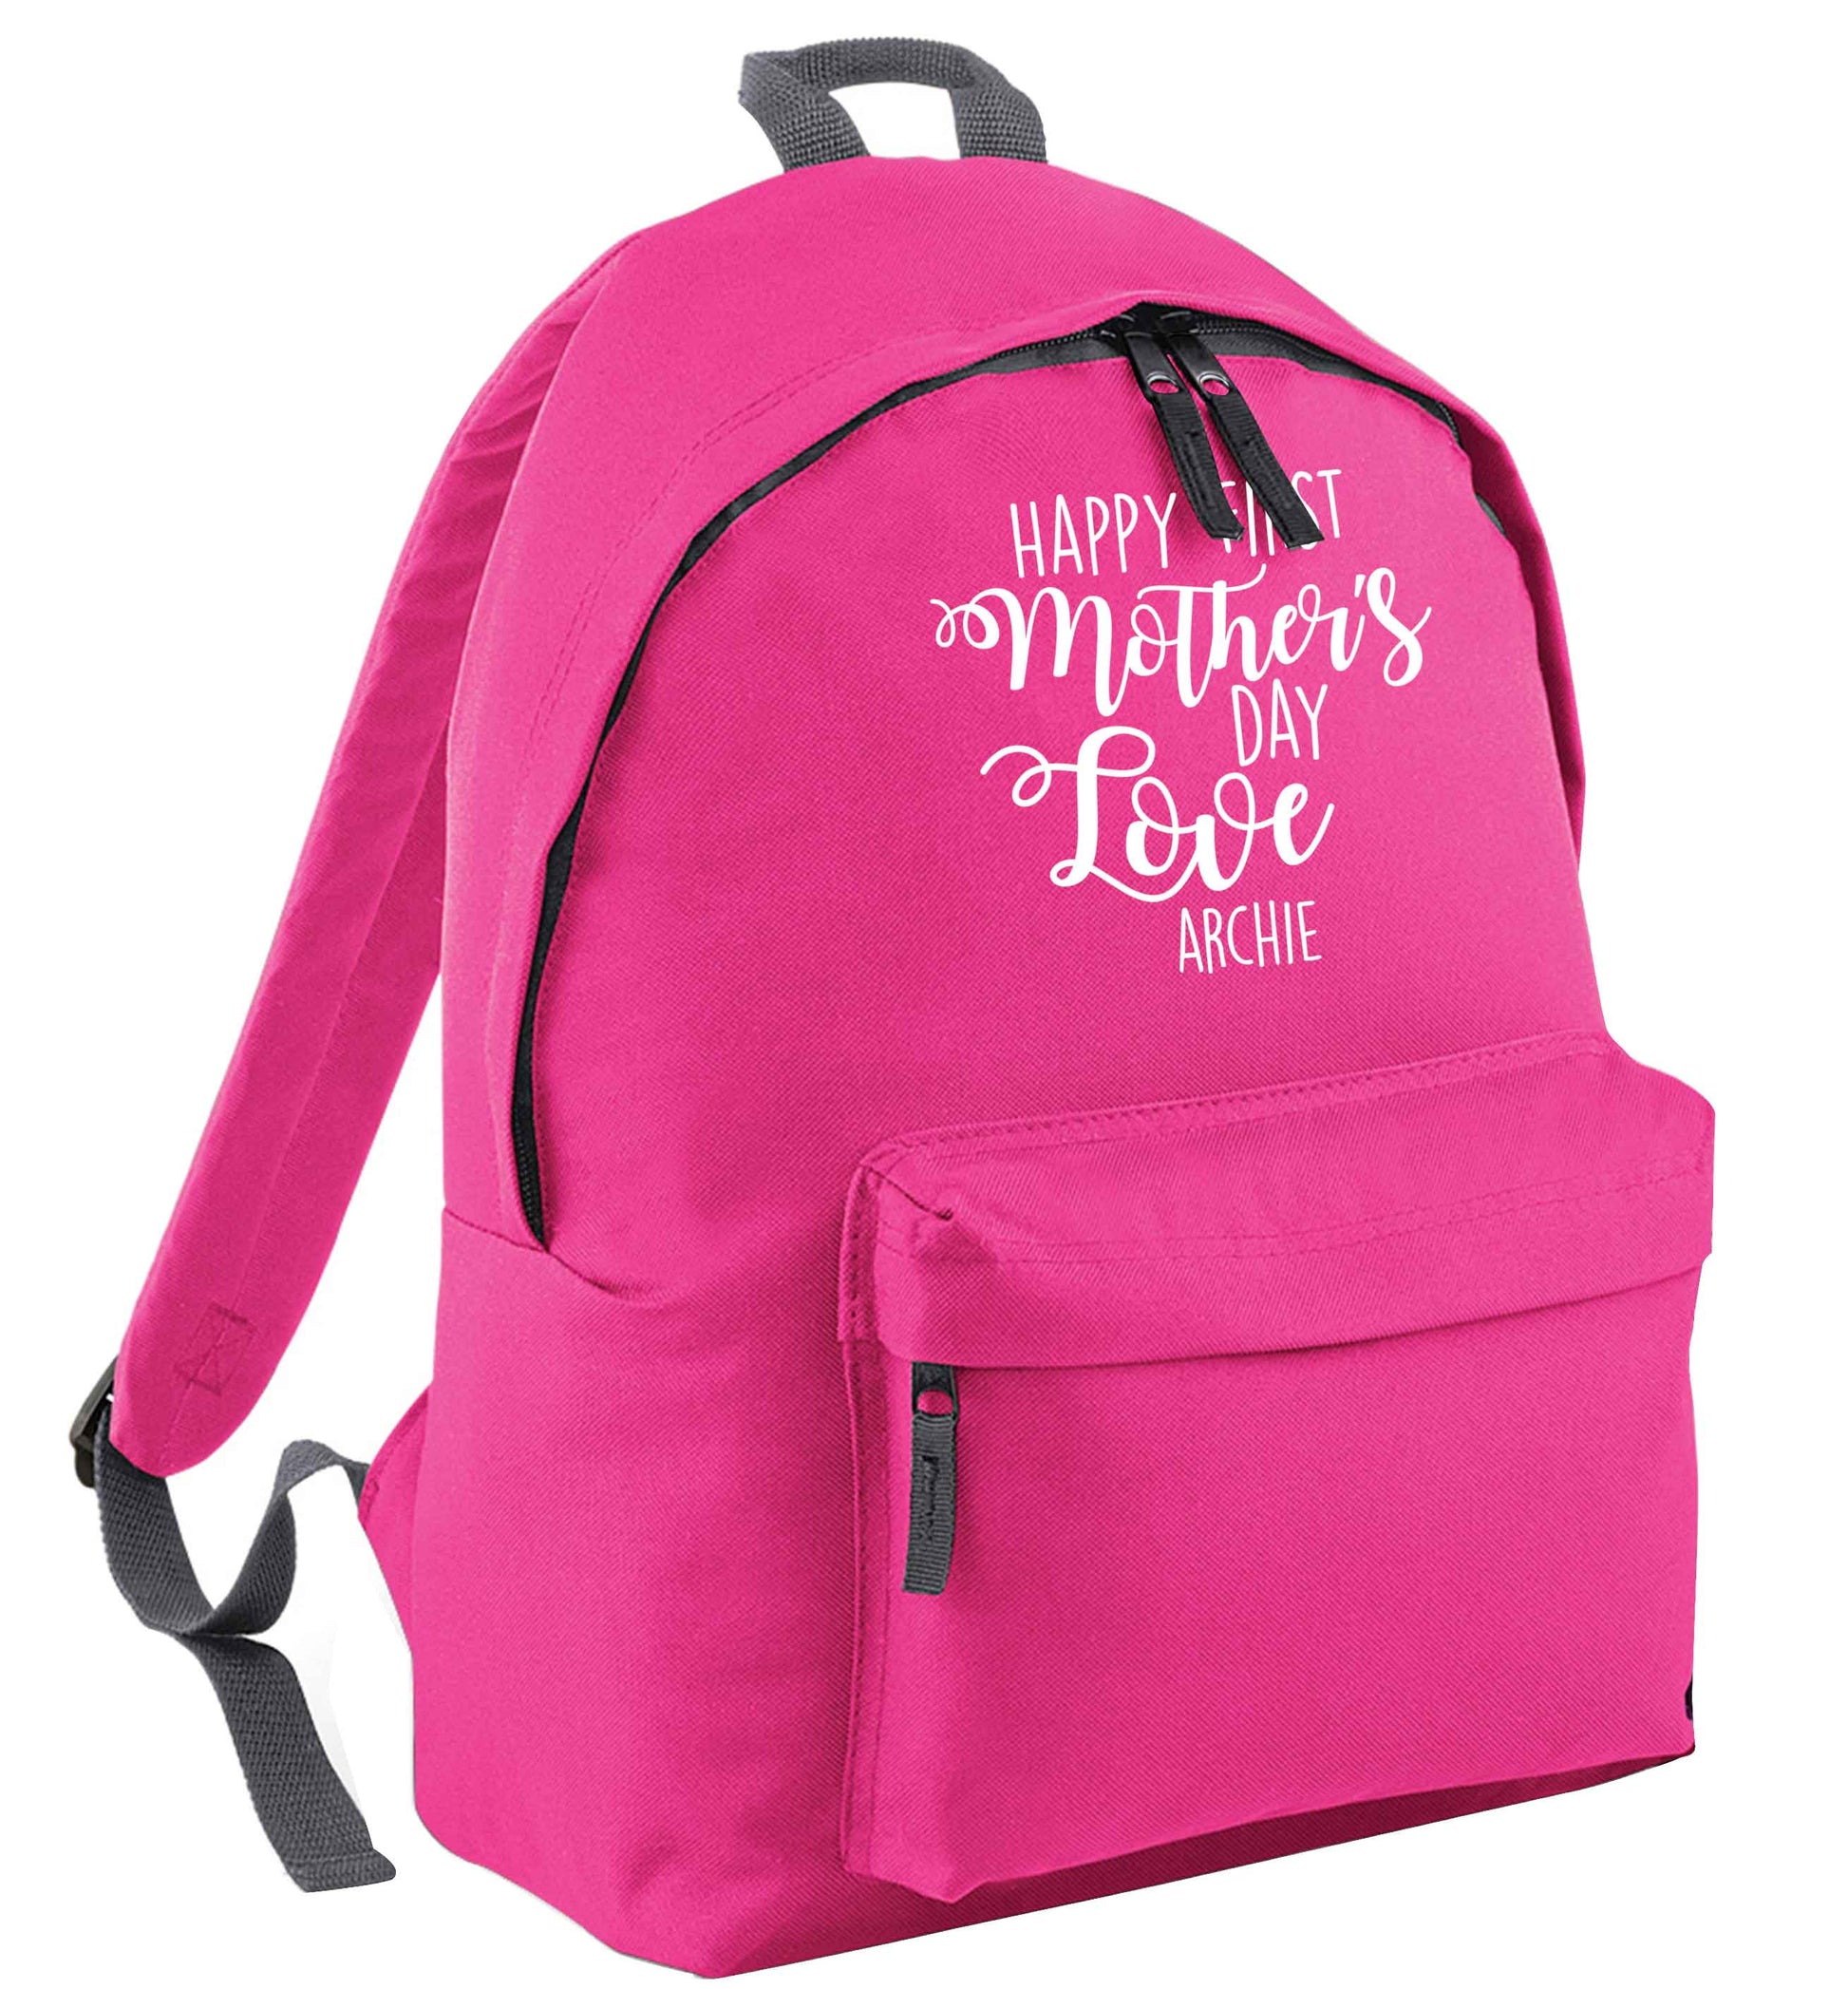 Mummy's first mother's day! pink adults backpack